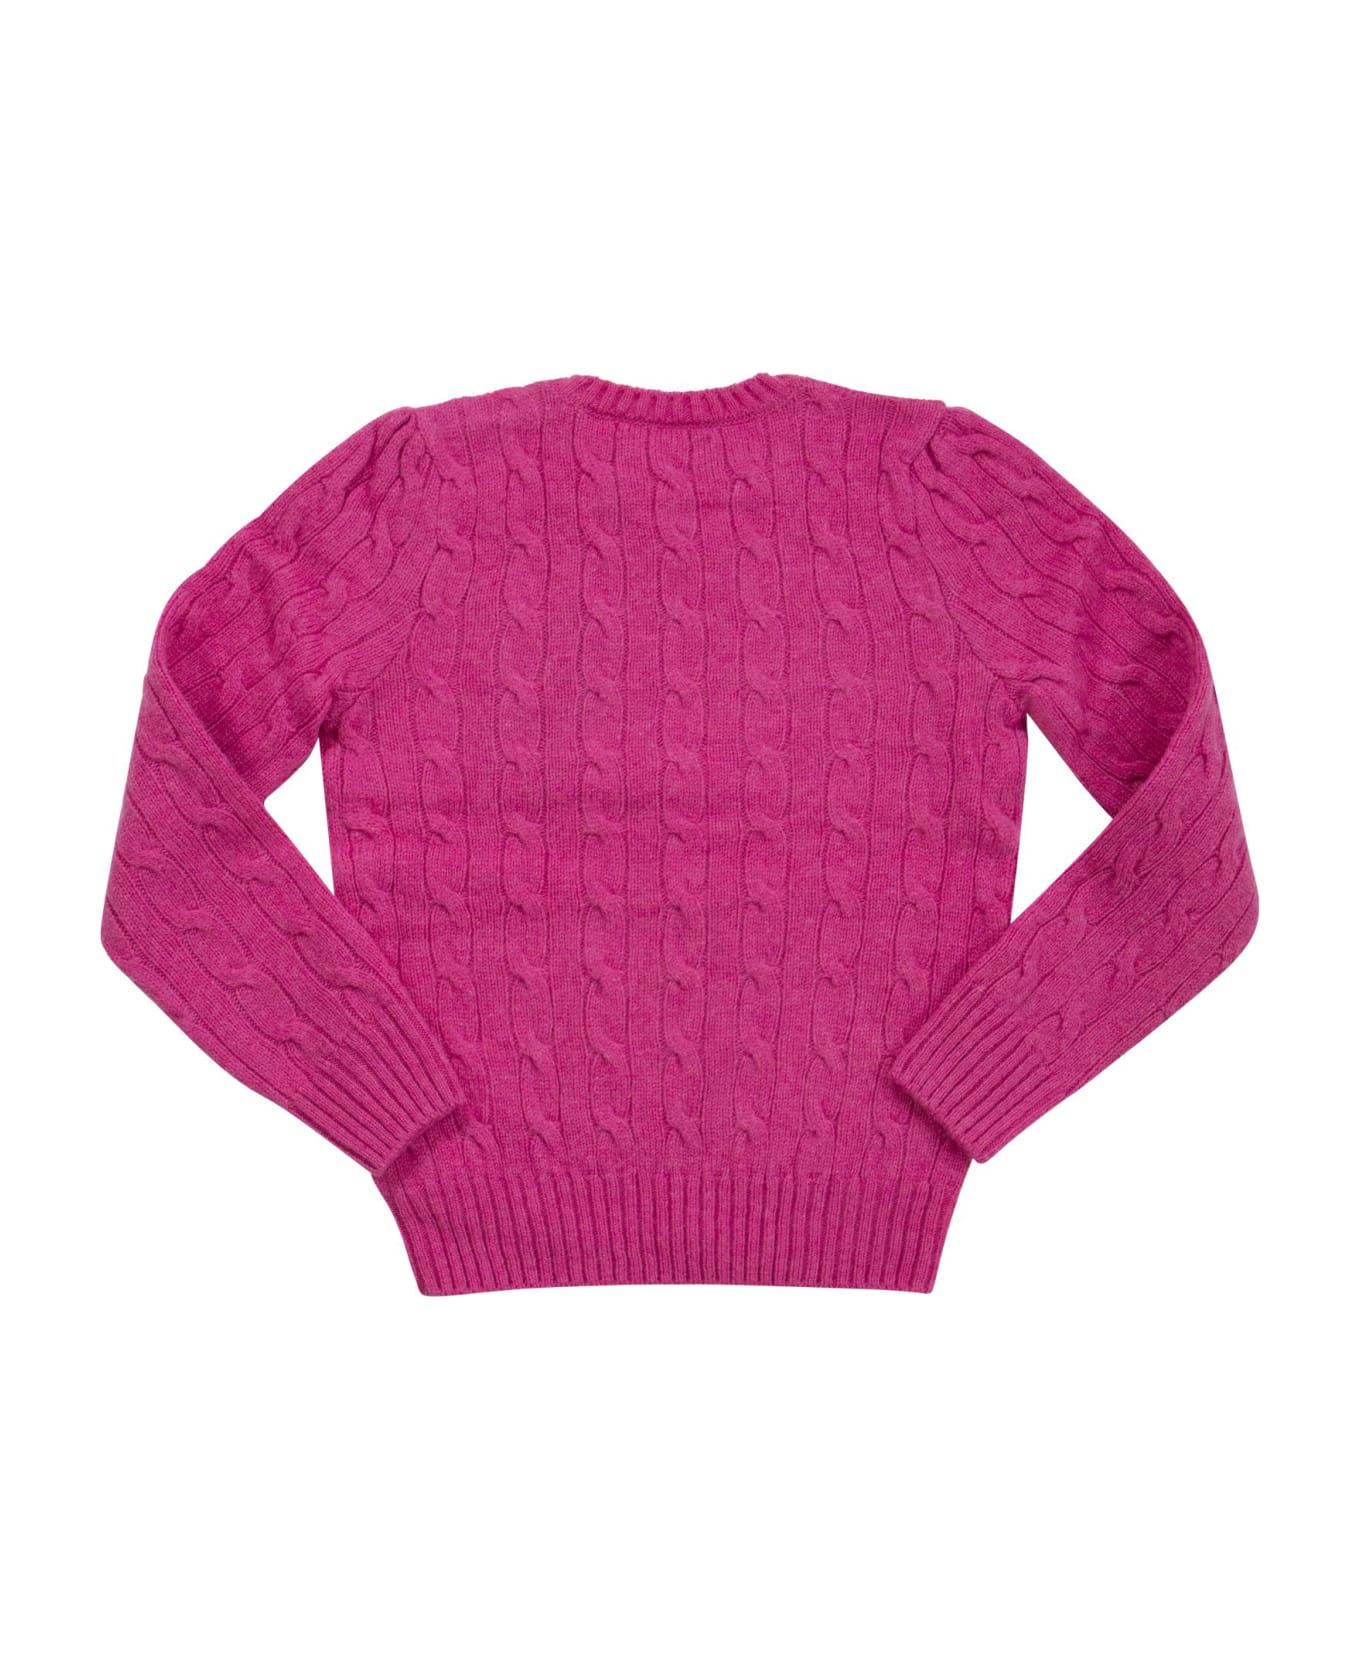 Polo Ralph Lauren Wool And Cashmere Cable-knit Sweater - Fuchsia